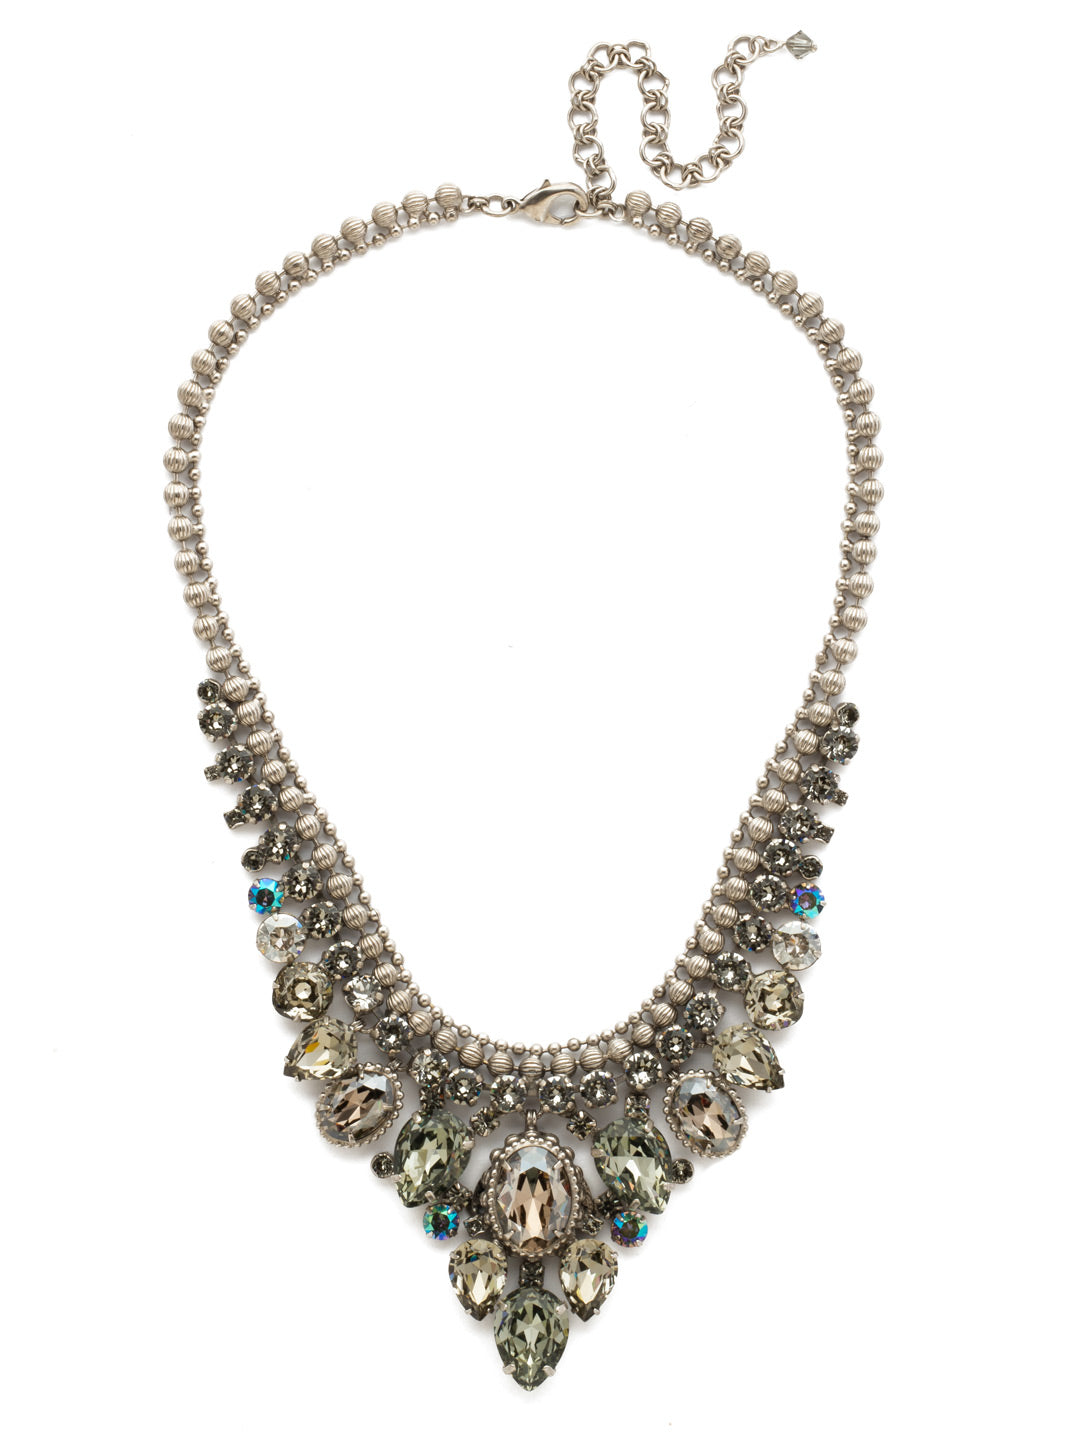 Protea Statement Statement Necklace - NDQ3ASCRO - <p>If you feel that bold is better, Protea is the necklace for you! With en elegantly edged chain and crystal for days, this statement-making style pairs perfectly with everything from your favorite party dress to jeans and a sweater! From Sorrelli's Crystal Rock collection in our Antique Silver-tone finish.</p>